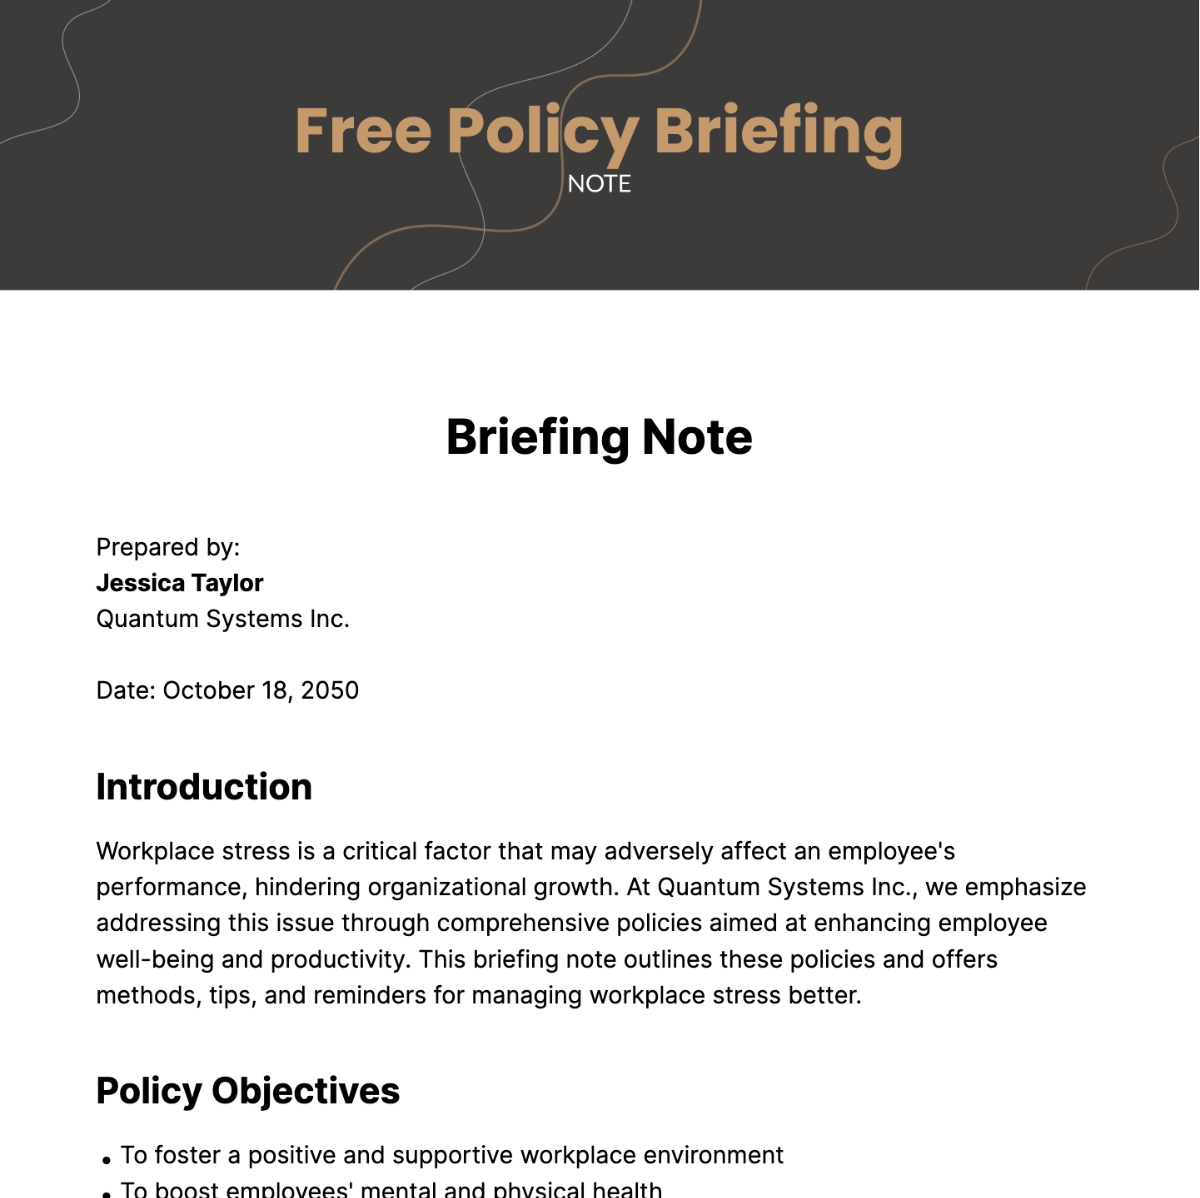 Free Policy Briefing Note Template